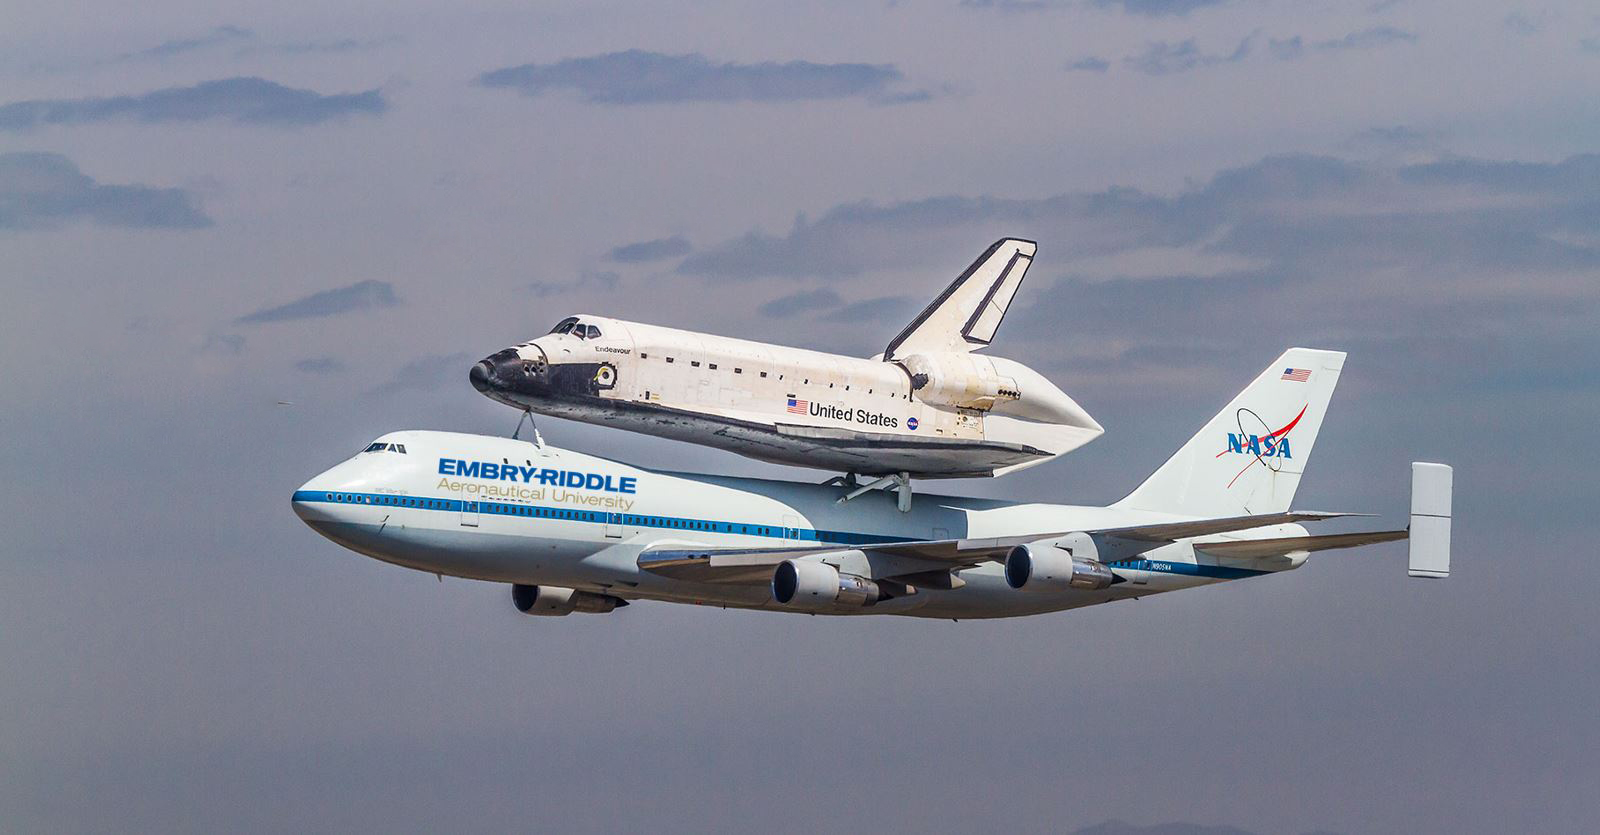 NASA Selling Space Shuttle & 747 To Embry-Riddle For Flight Training